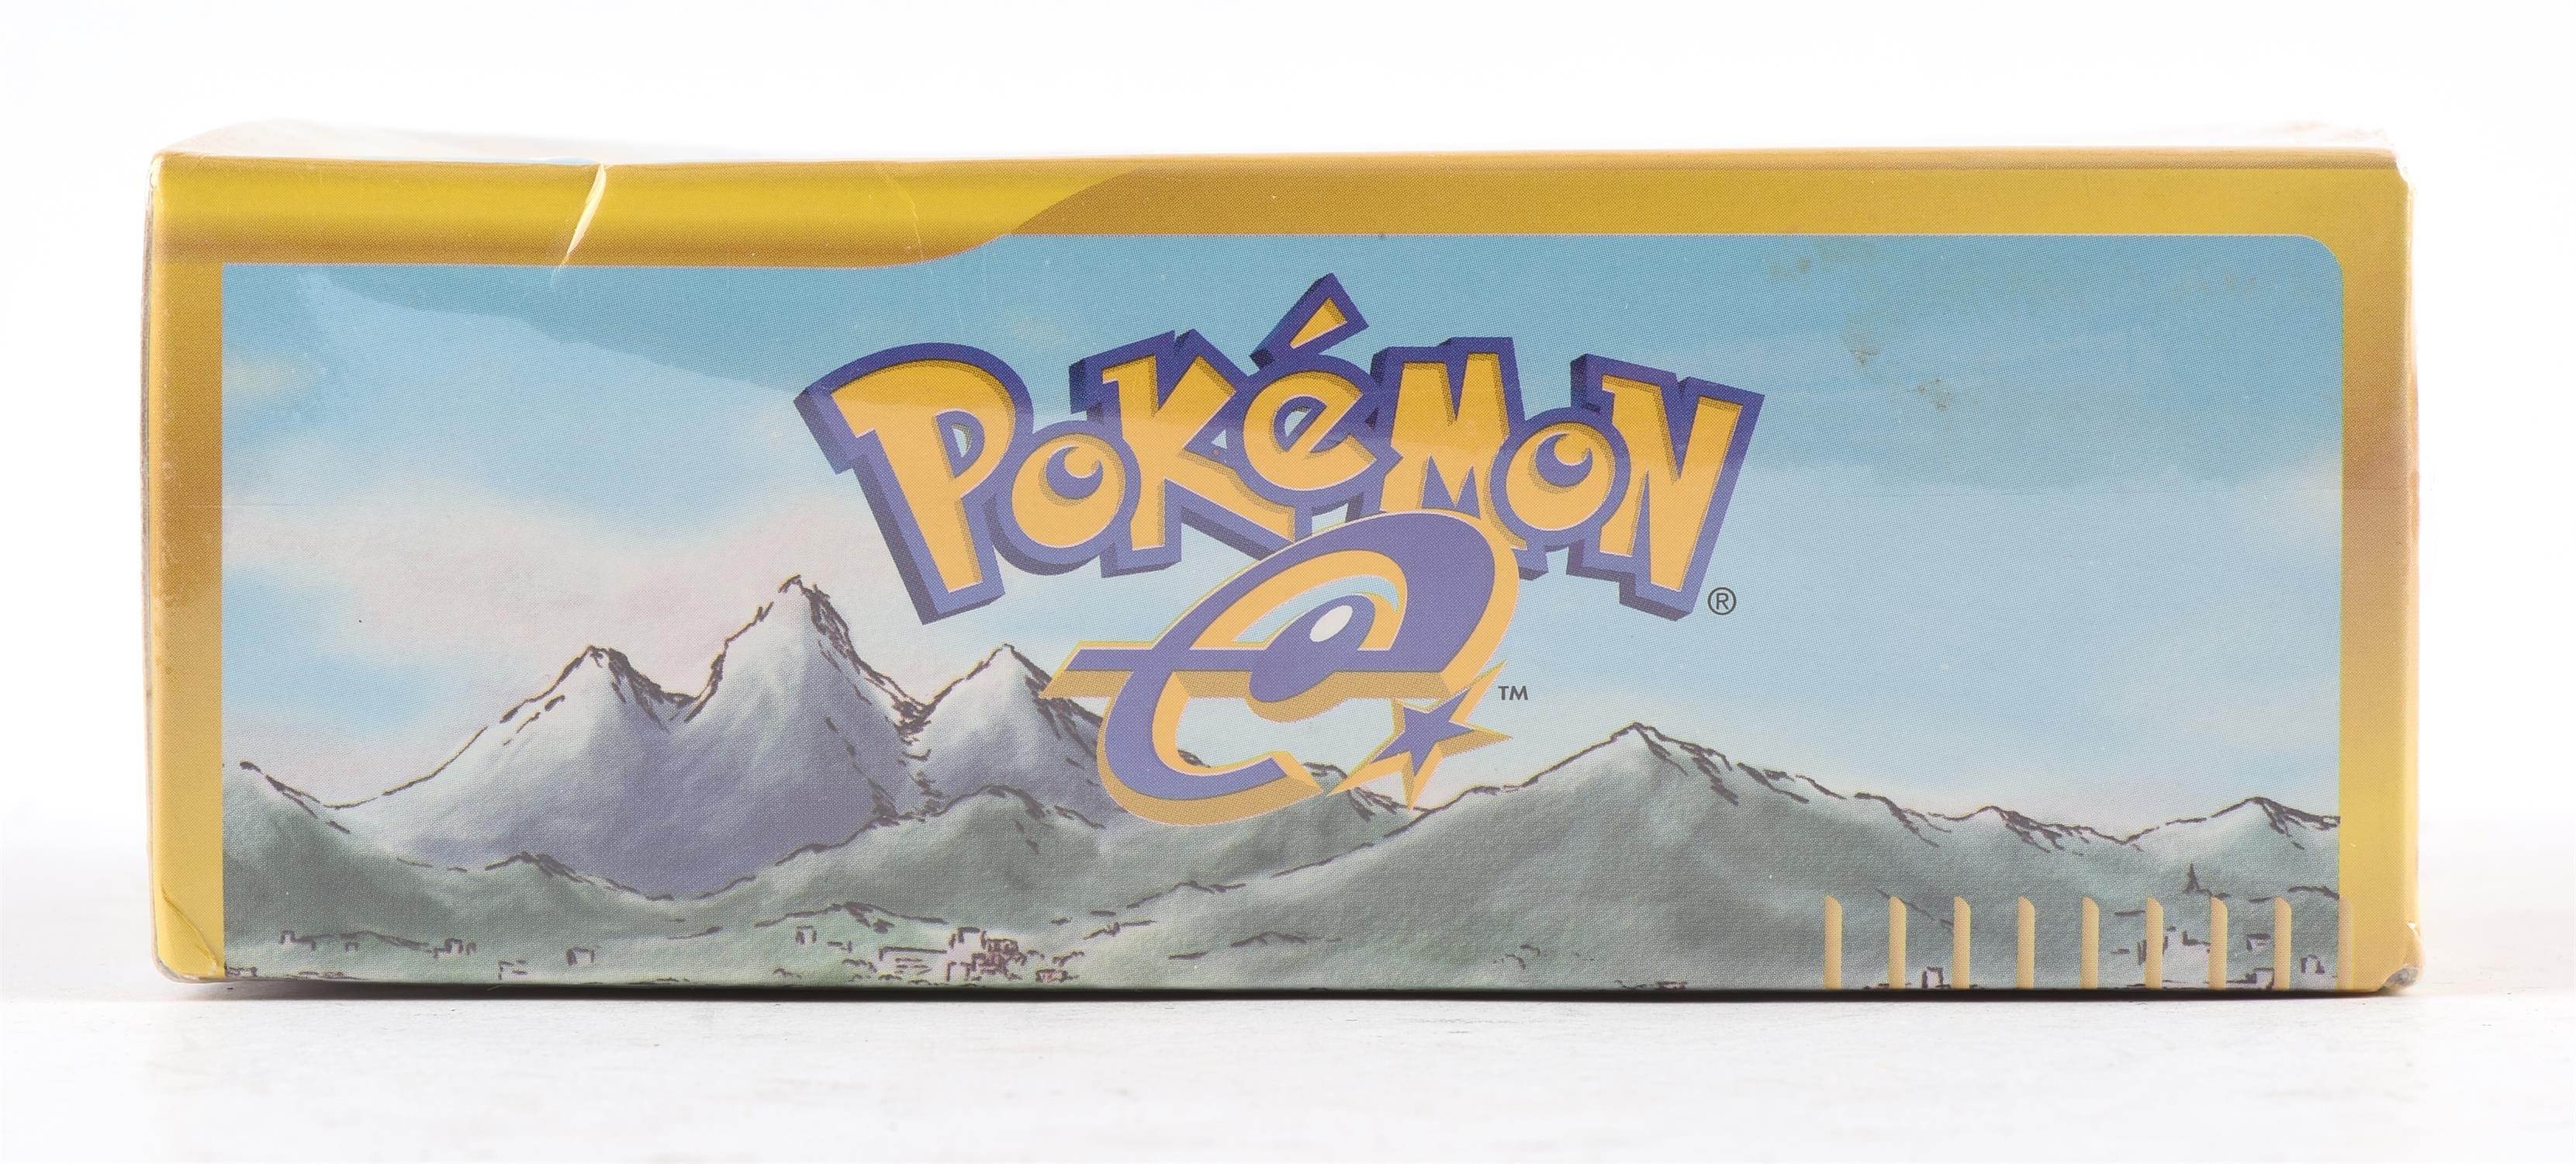 Pokemon TCG. Japanese Town On No Map (Aquapolis), 2002 first edition e-series sealed booster box of - Image 5 of 7